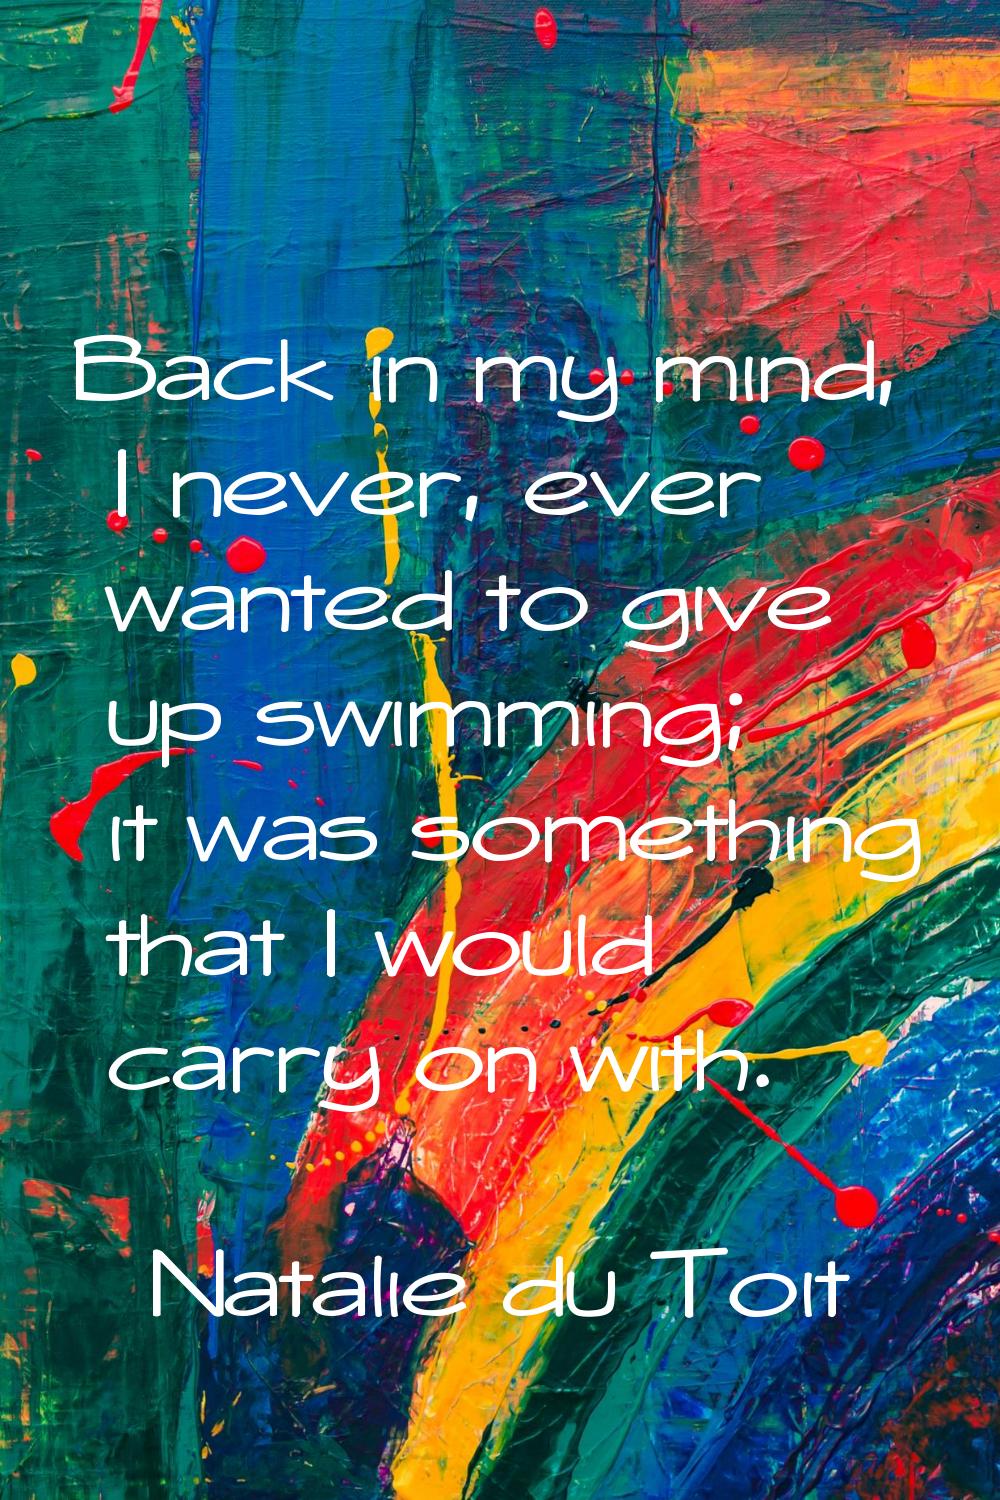 Back in my mind, I never, ever wanted to give up swimming; it was something that I would carry on w